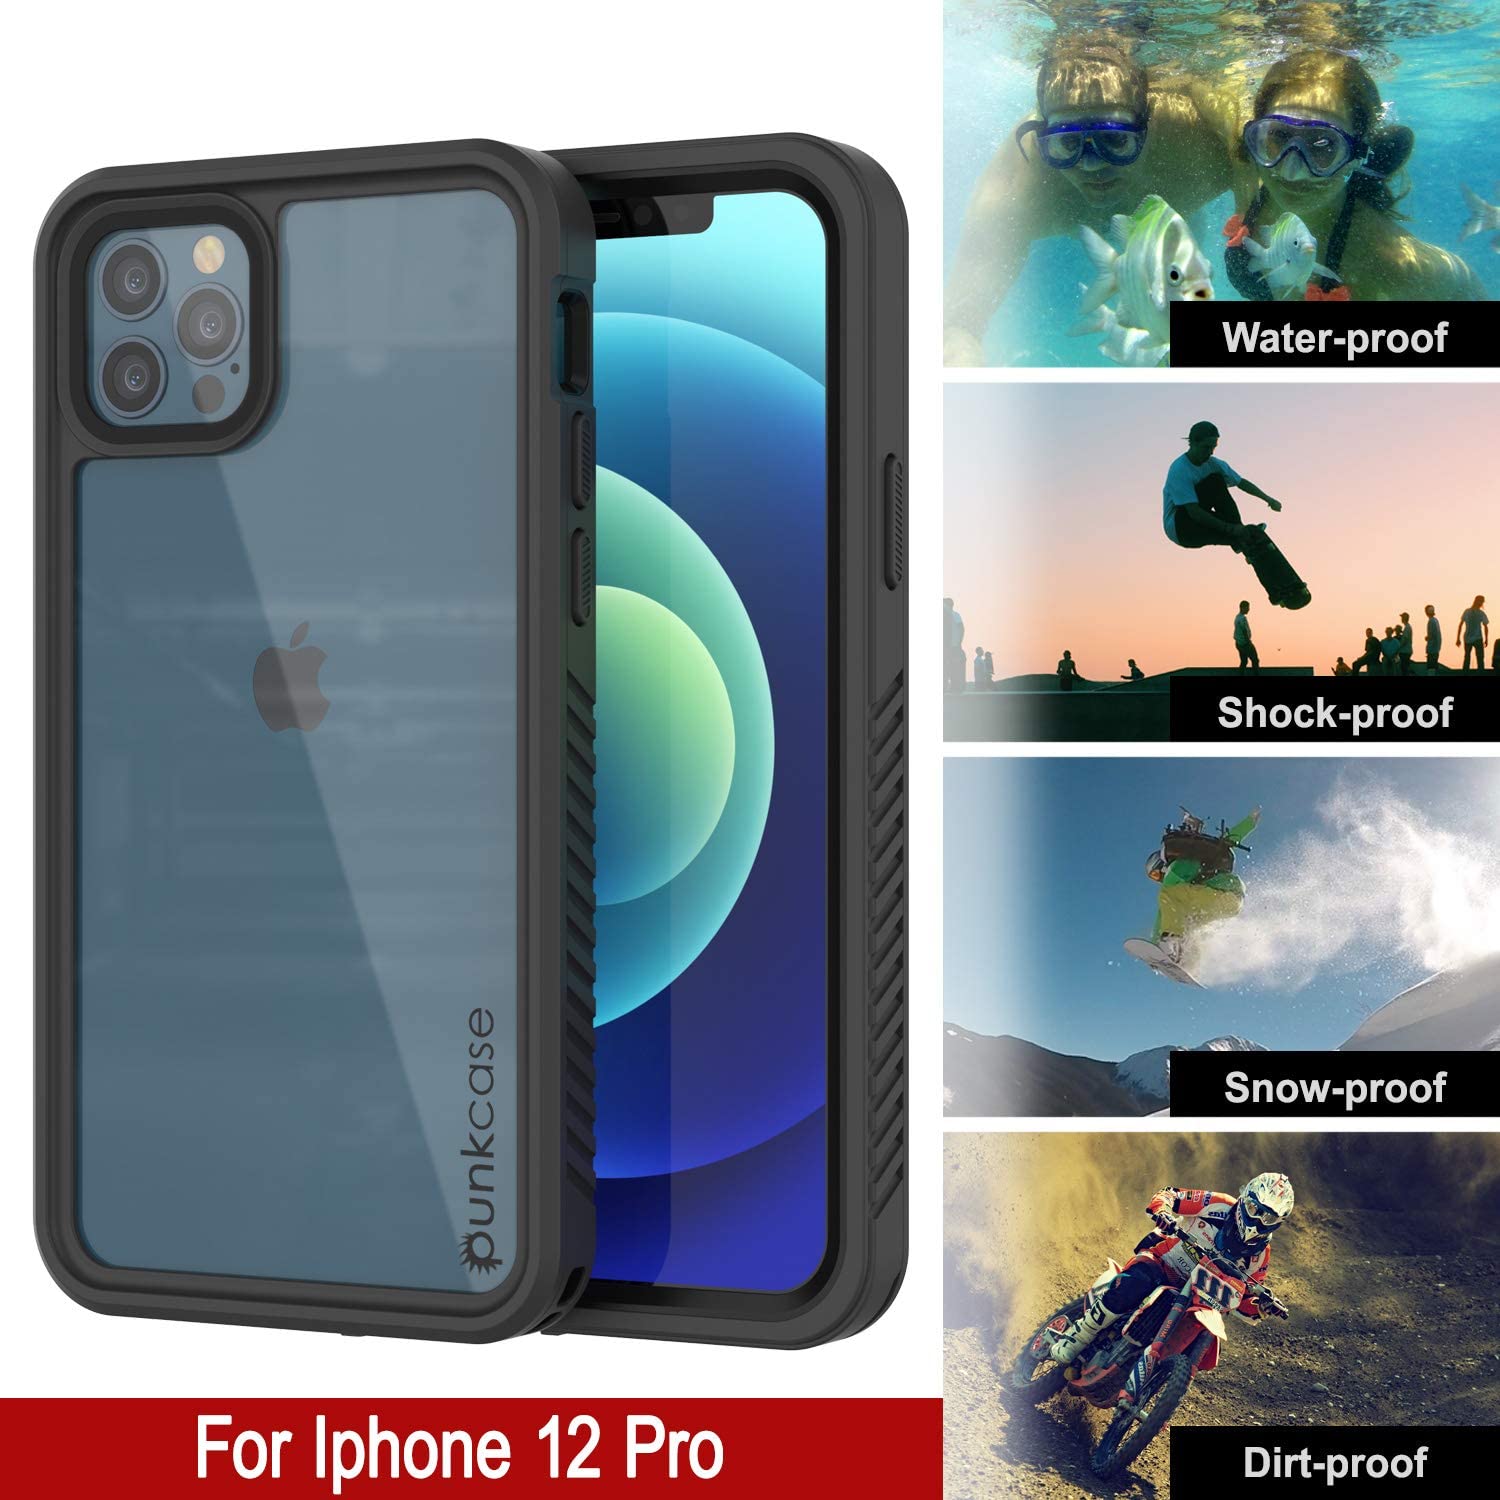 iPhone 12 Pro Waterproof Case, Punkcase [Extreme Series] Armor Cover W/ Built In Screen Protector [Black]